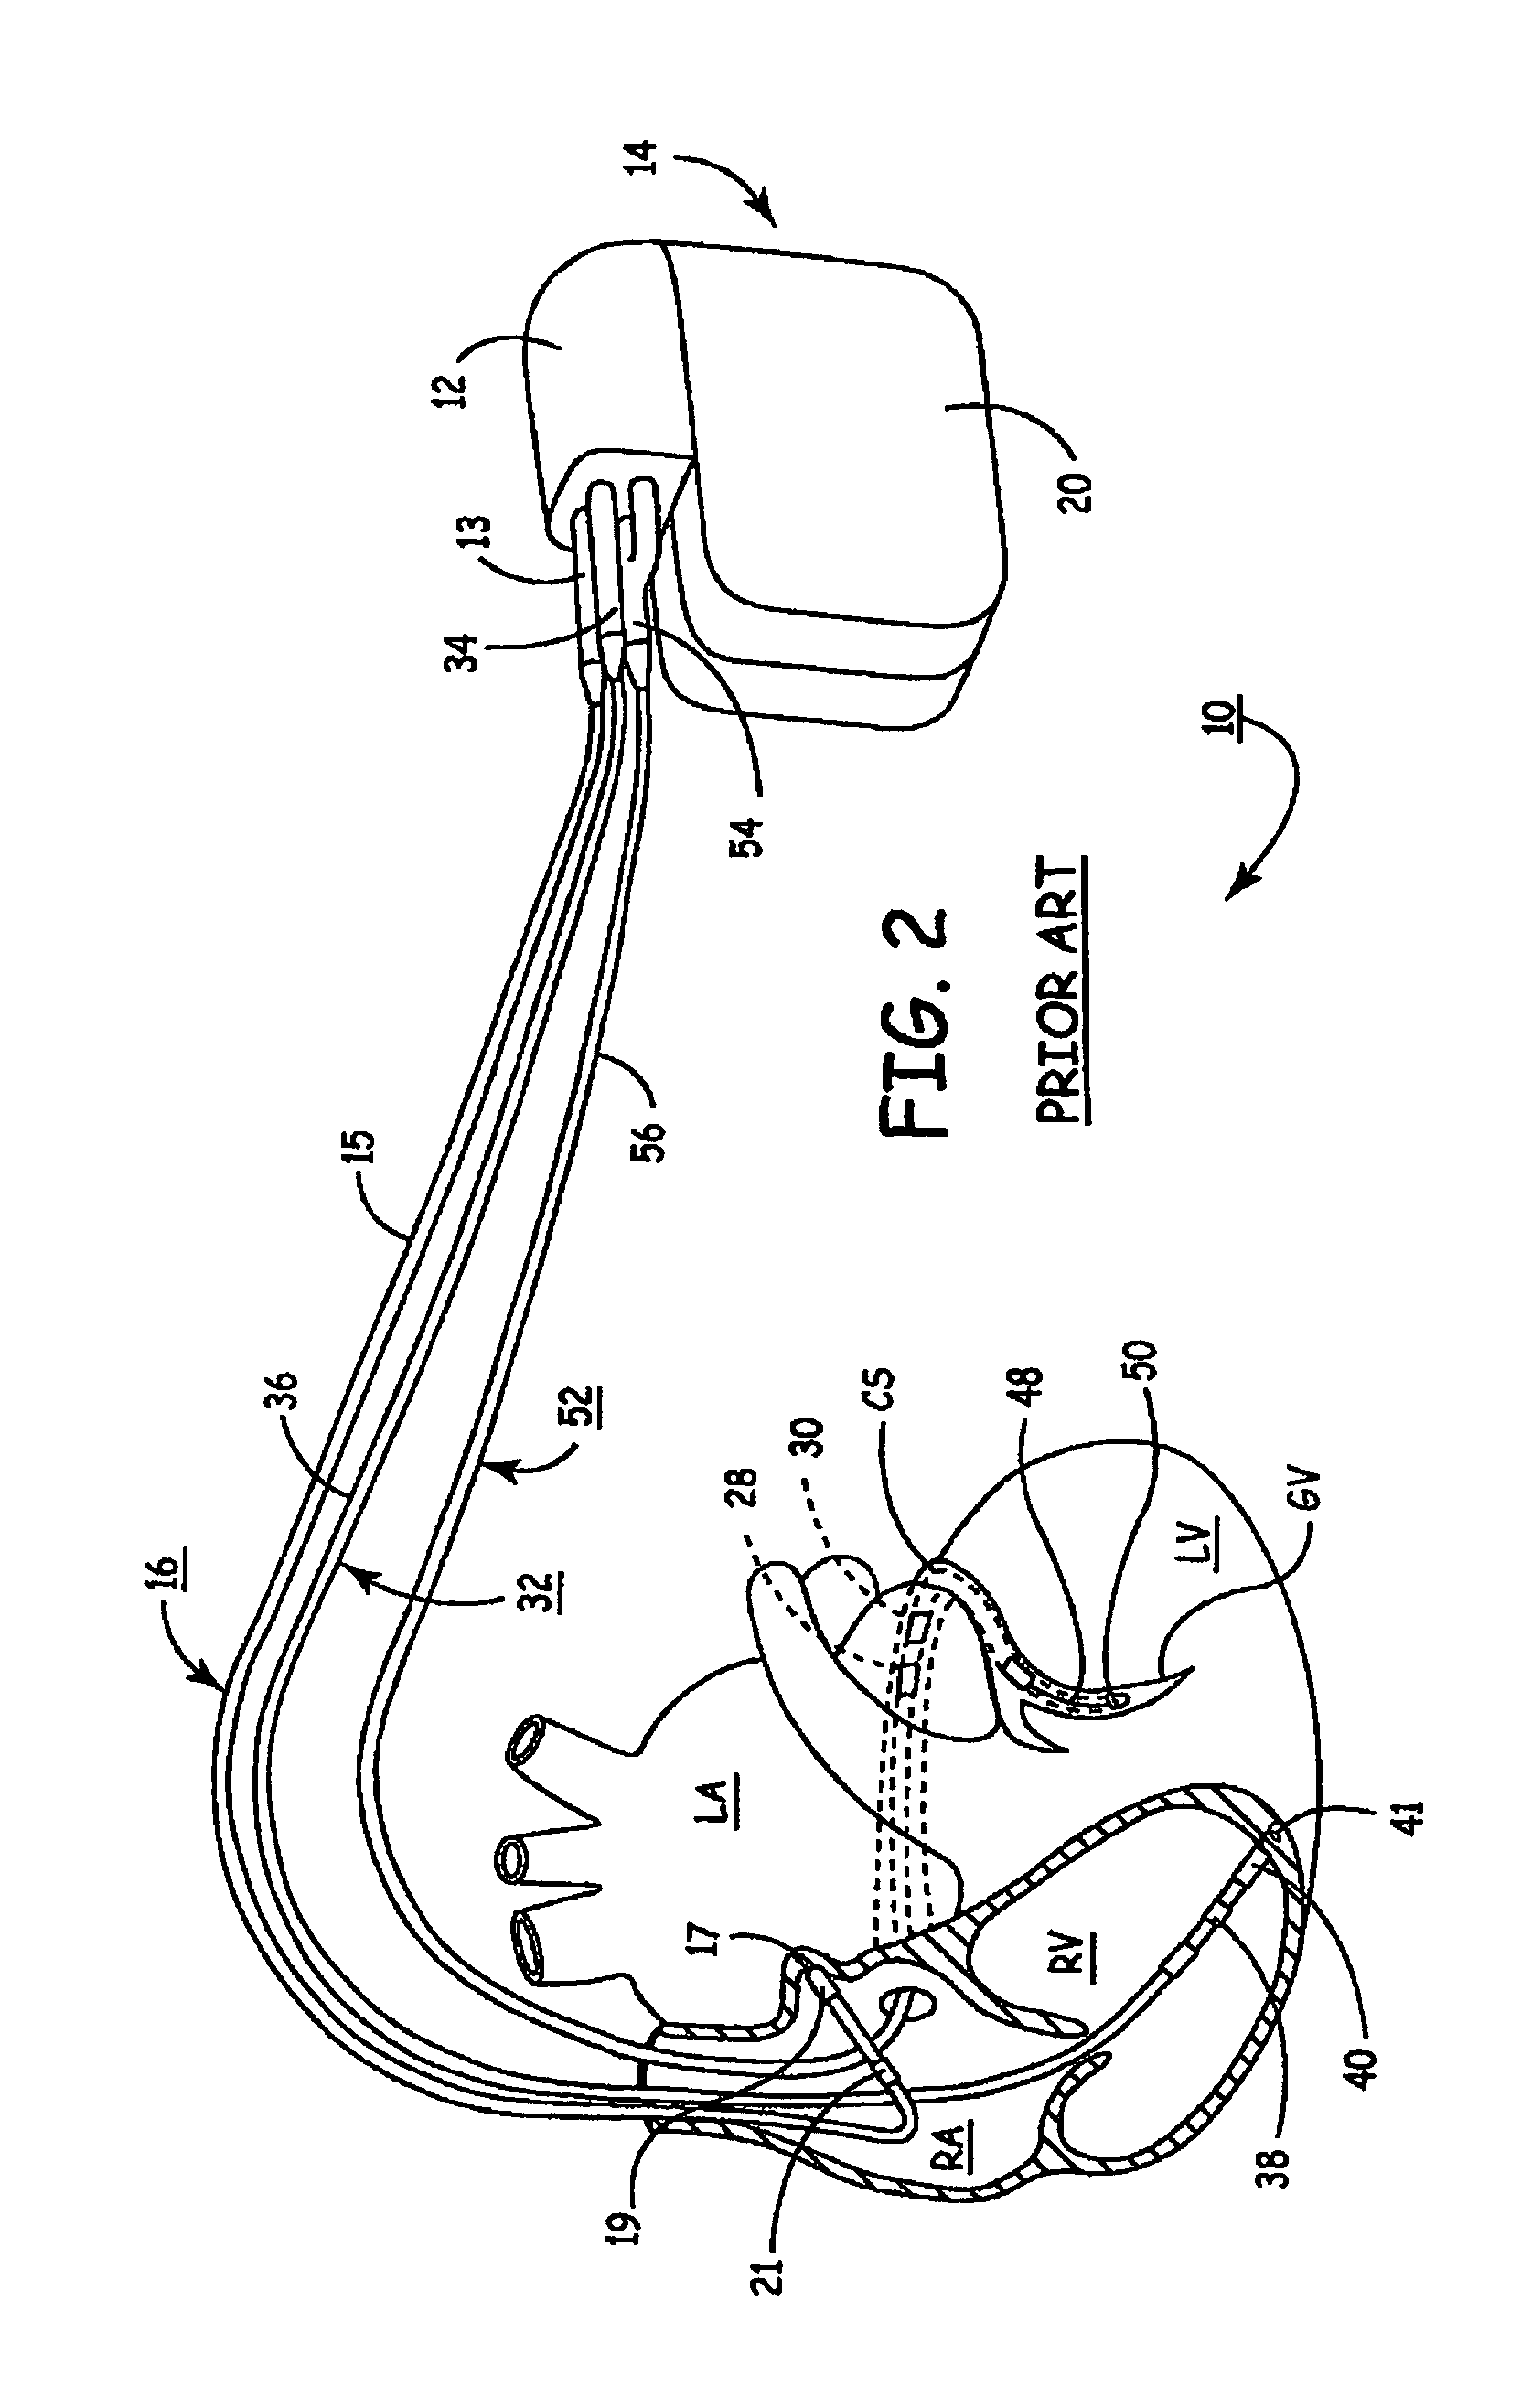 Apparatus and methods of energy efficient, atrial-based Bi-ventricular fusion-pacing